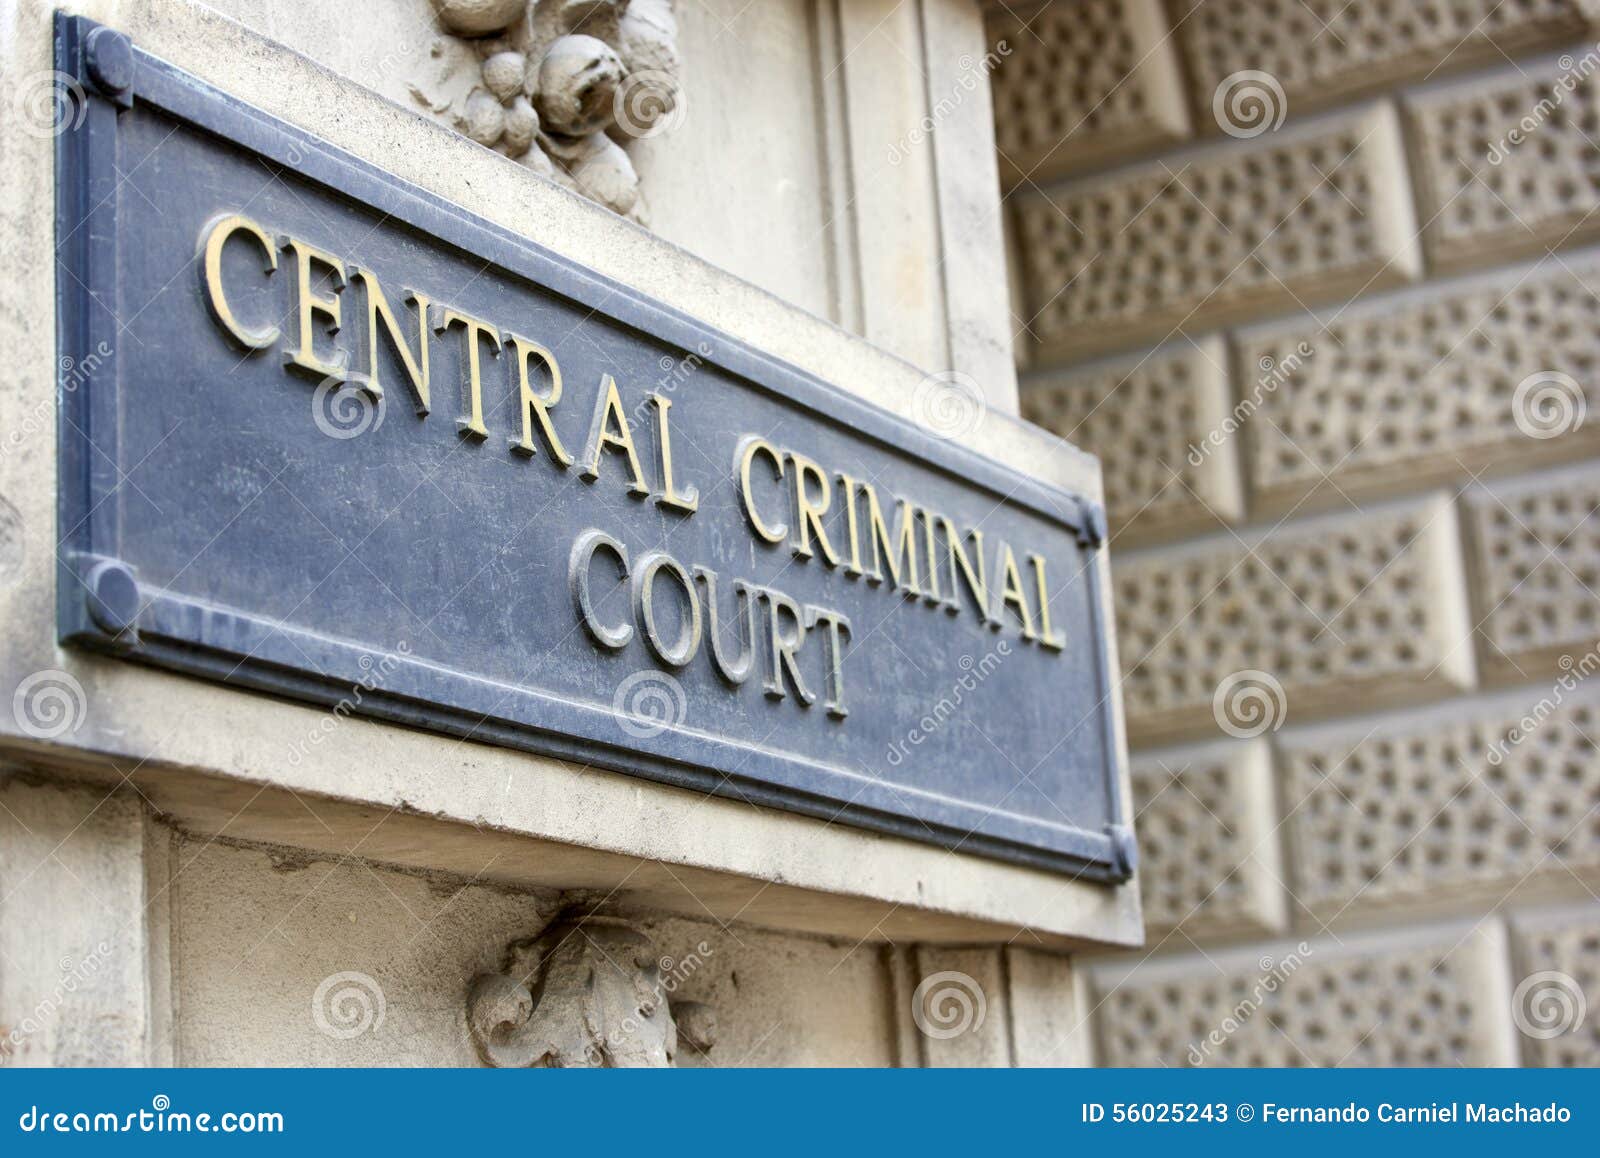 Central Criminal Court editorial stock photo. Image of sign - 56025243